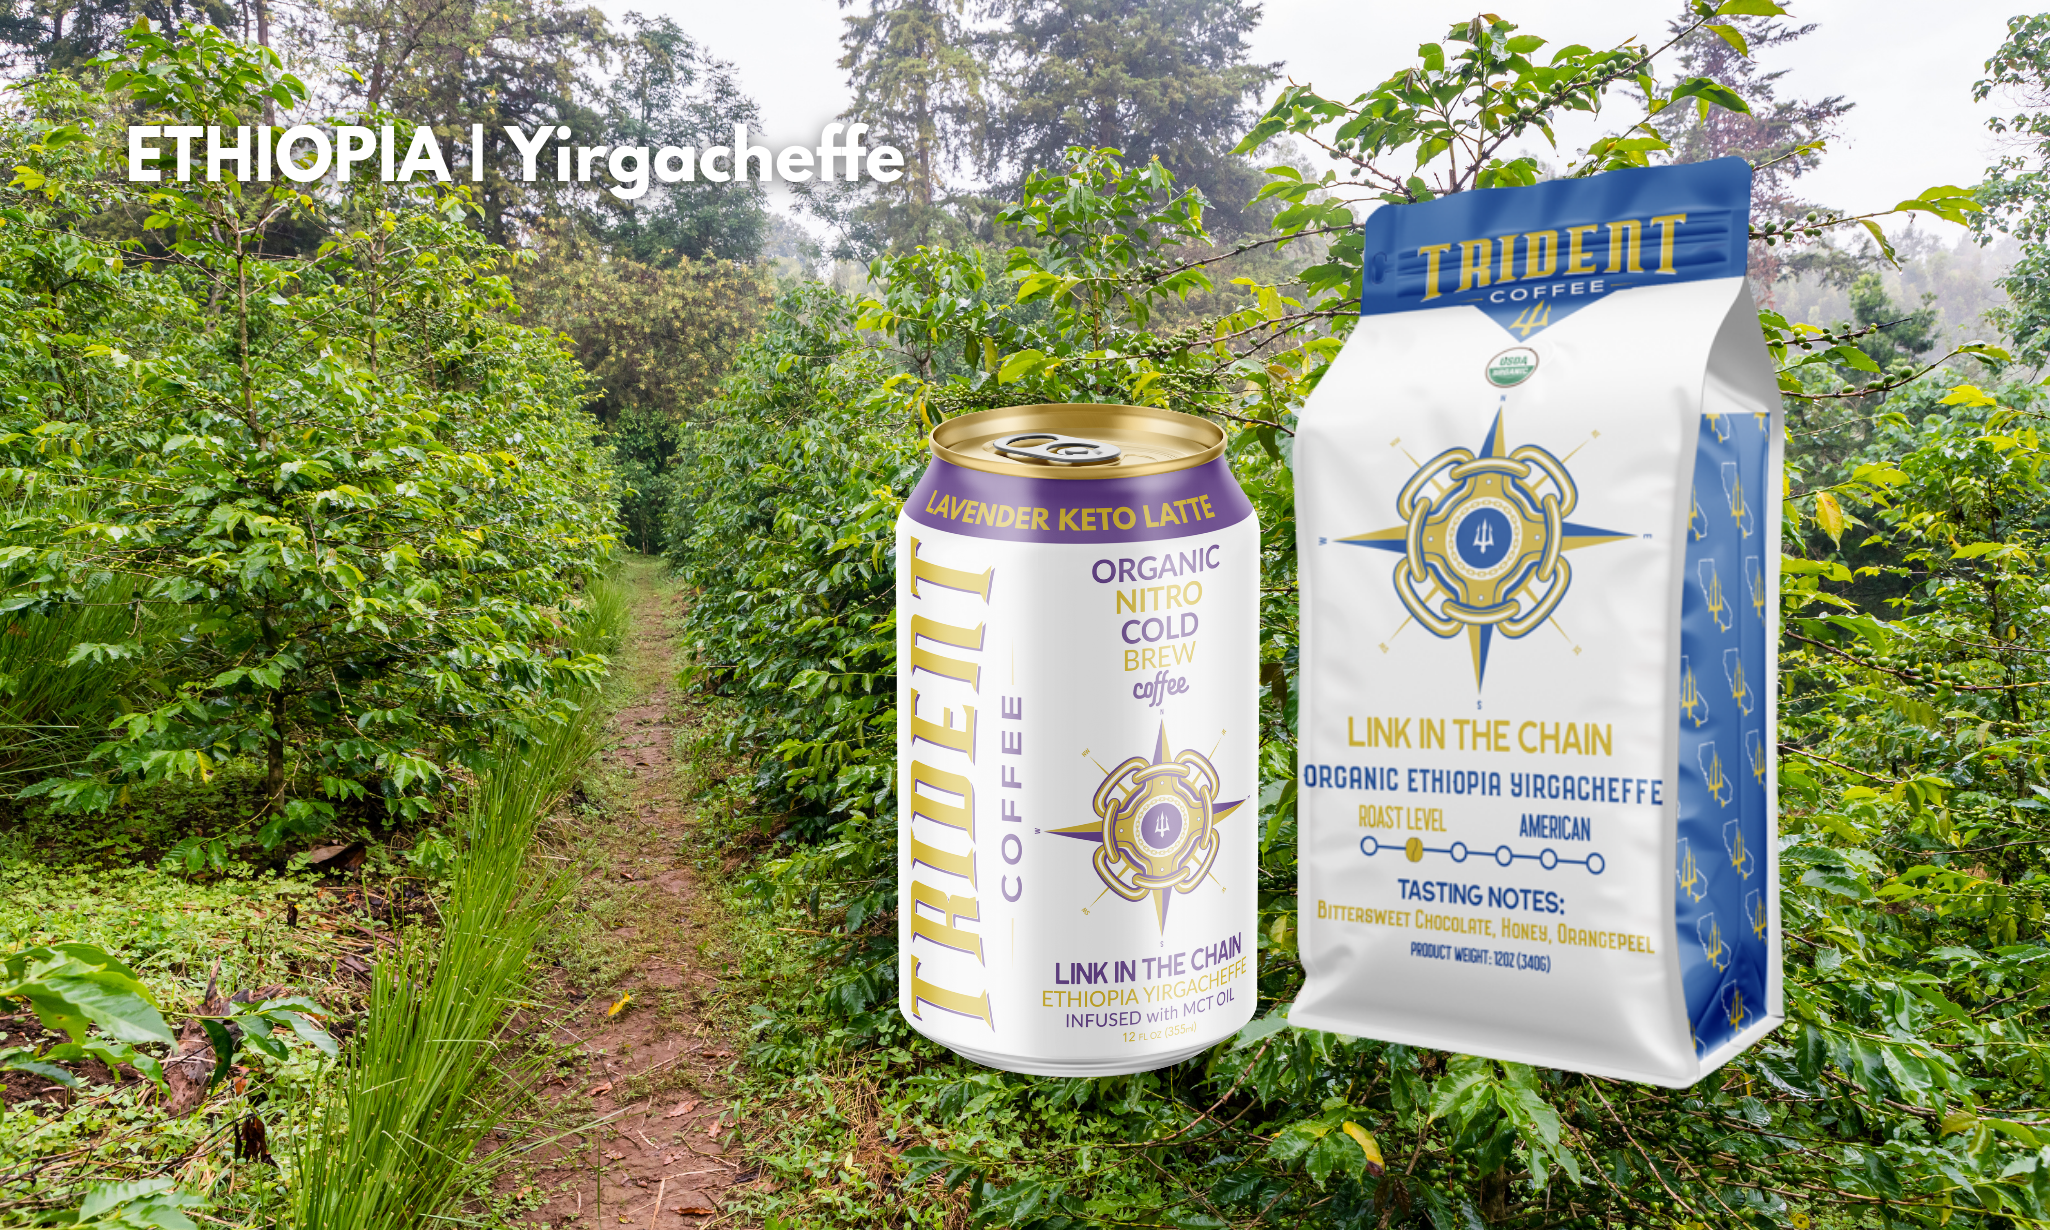 link in the chain - trident coffee - roasted coffee - cold brew - Ethiopia